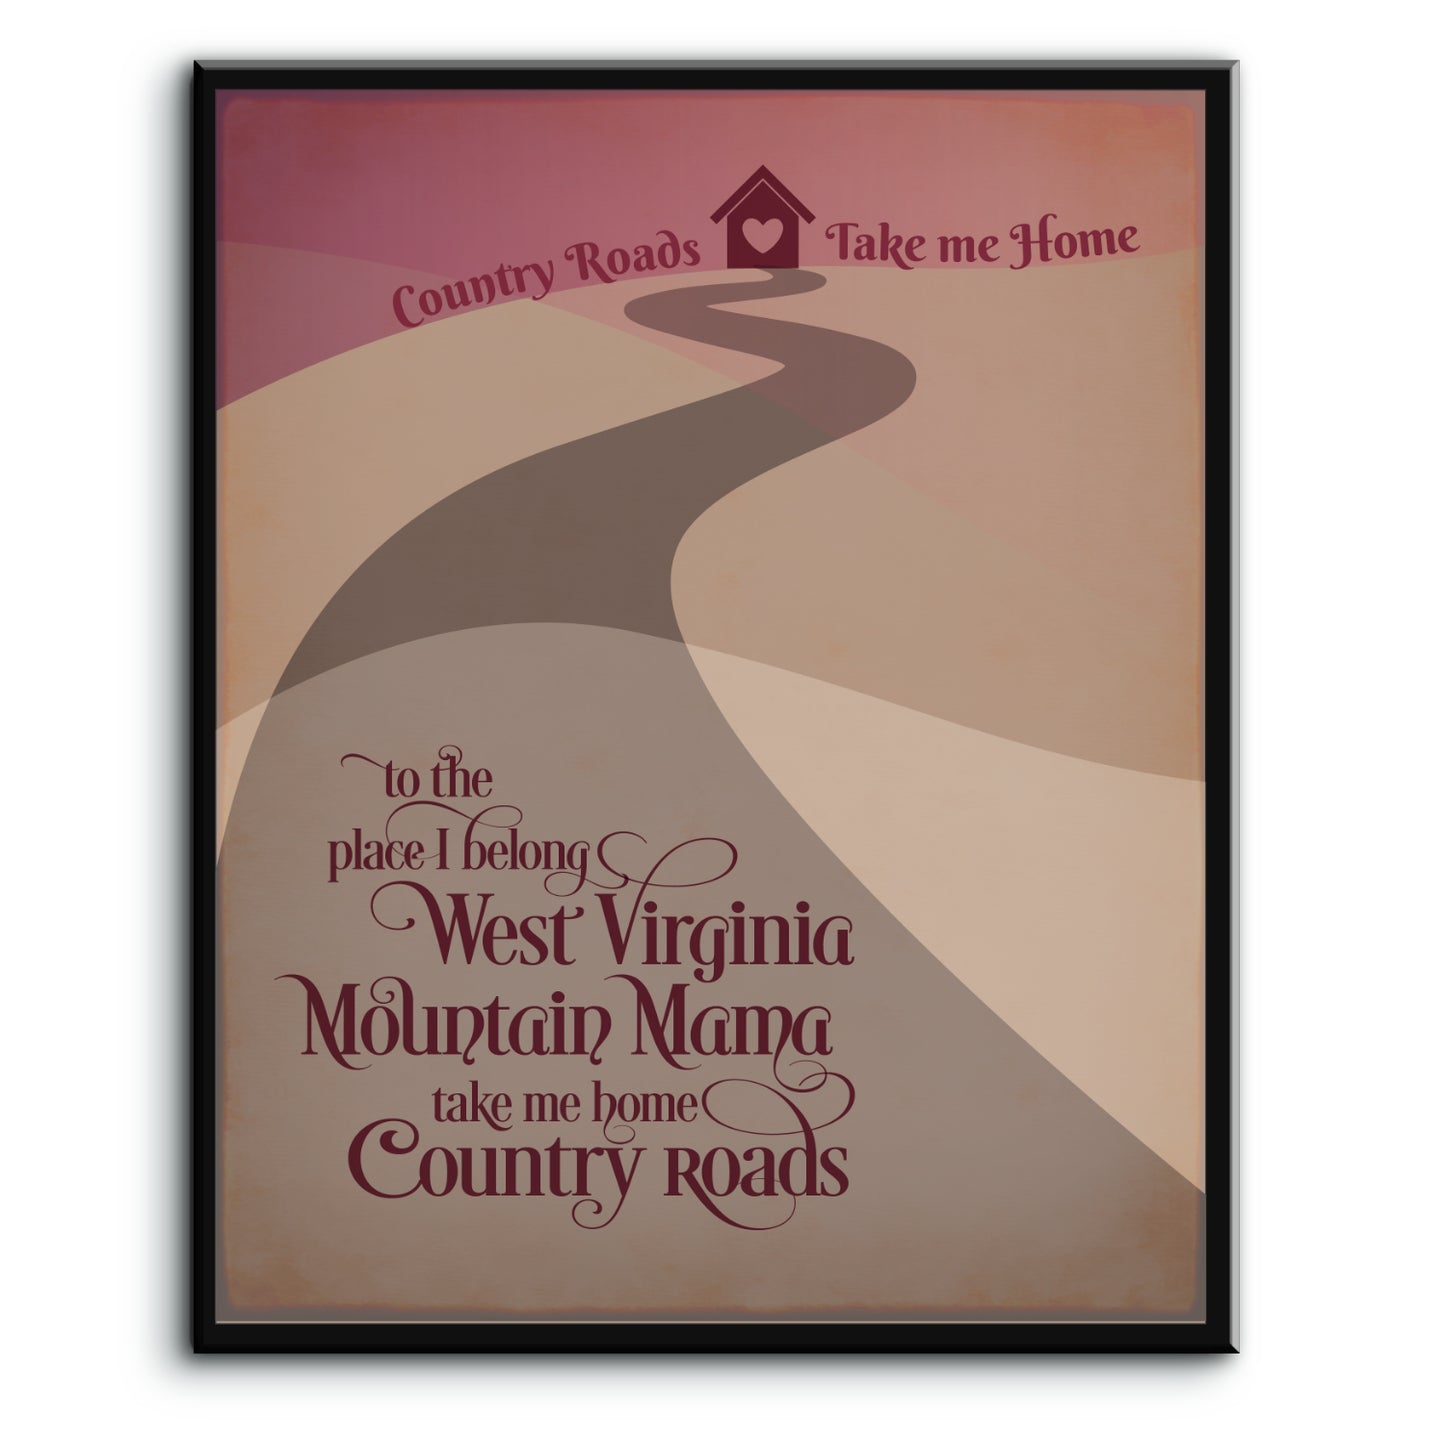 Take Me Home Country Roads by John Denver - 70s Country Art